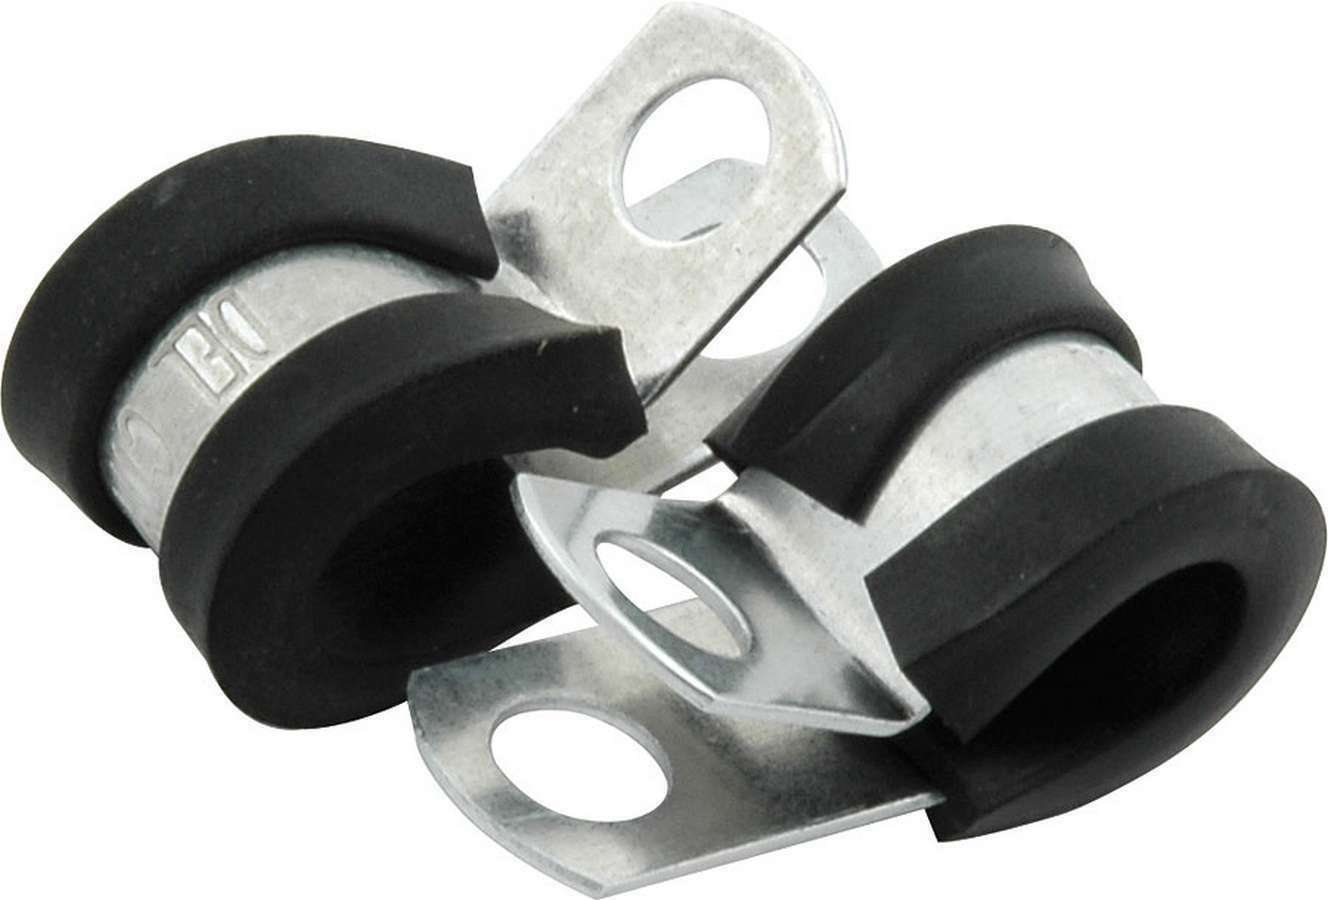 Rubber Cushioned Aluminum Line Clamp 3/8" 10 pack All18302